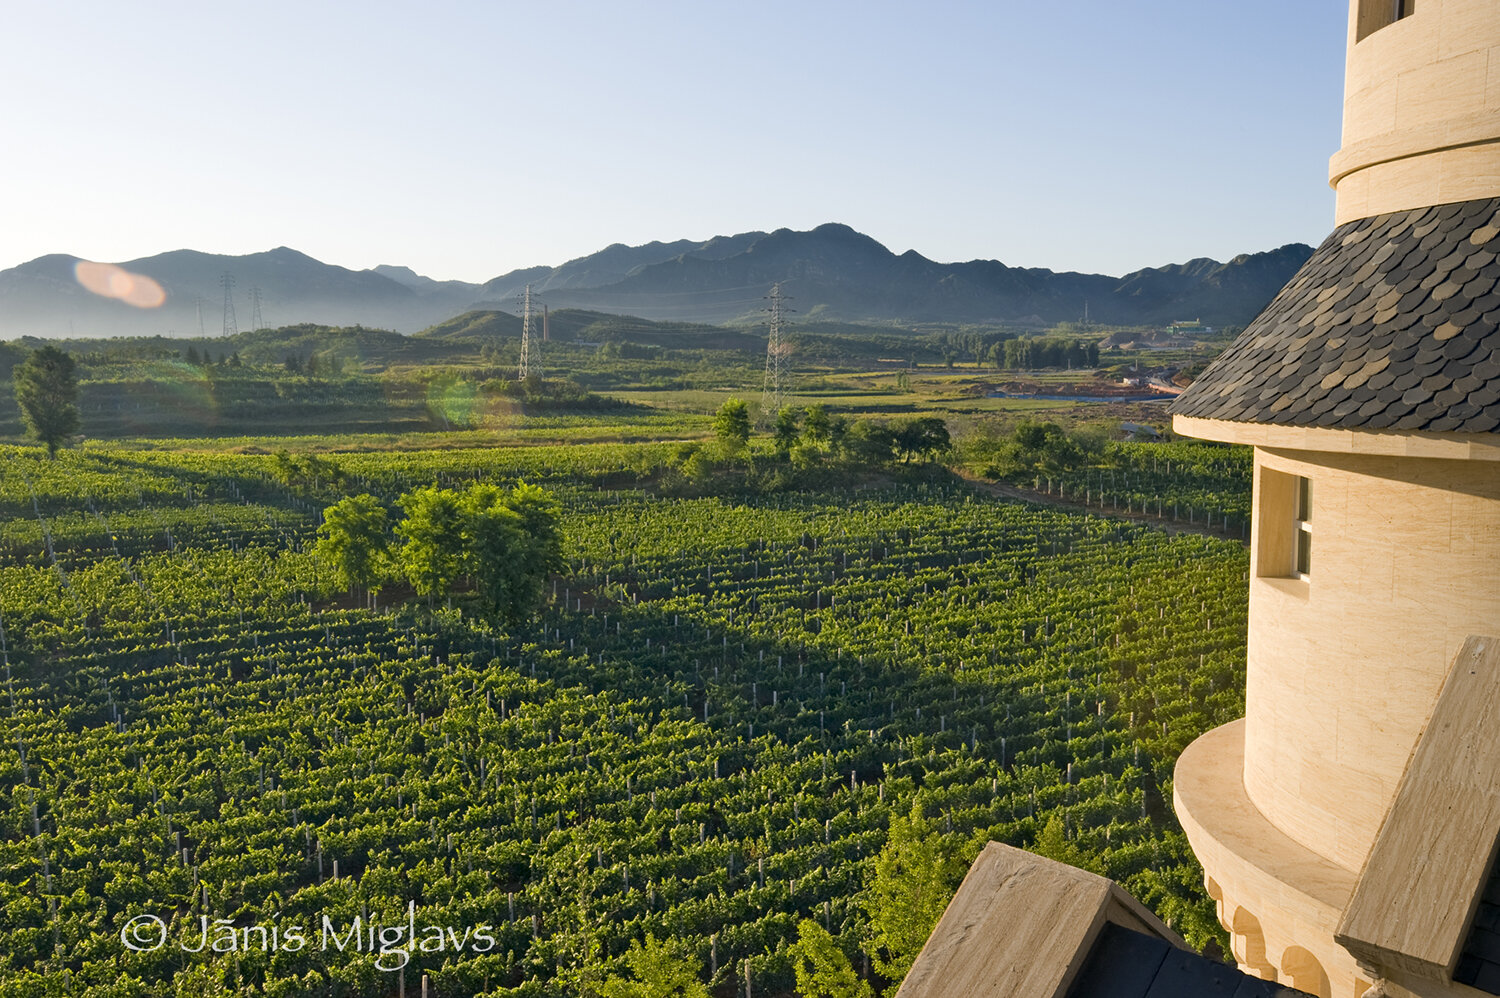 Vineyard view from castle turret at Chateau Changyu AFIP Global winery